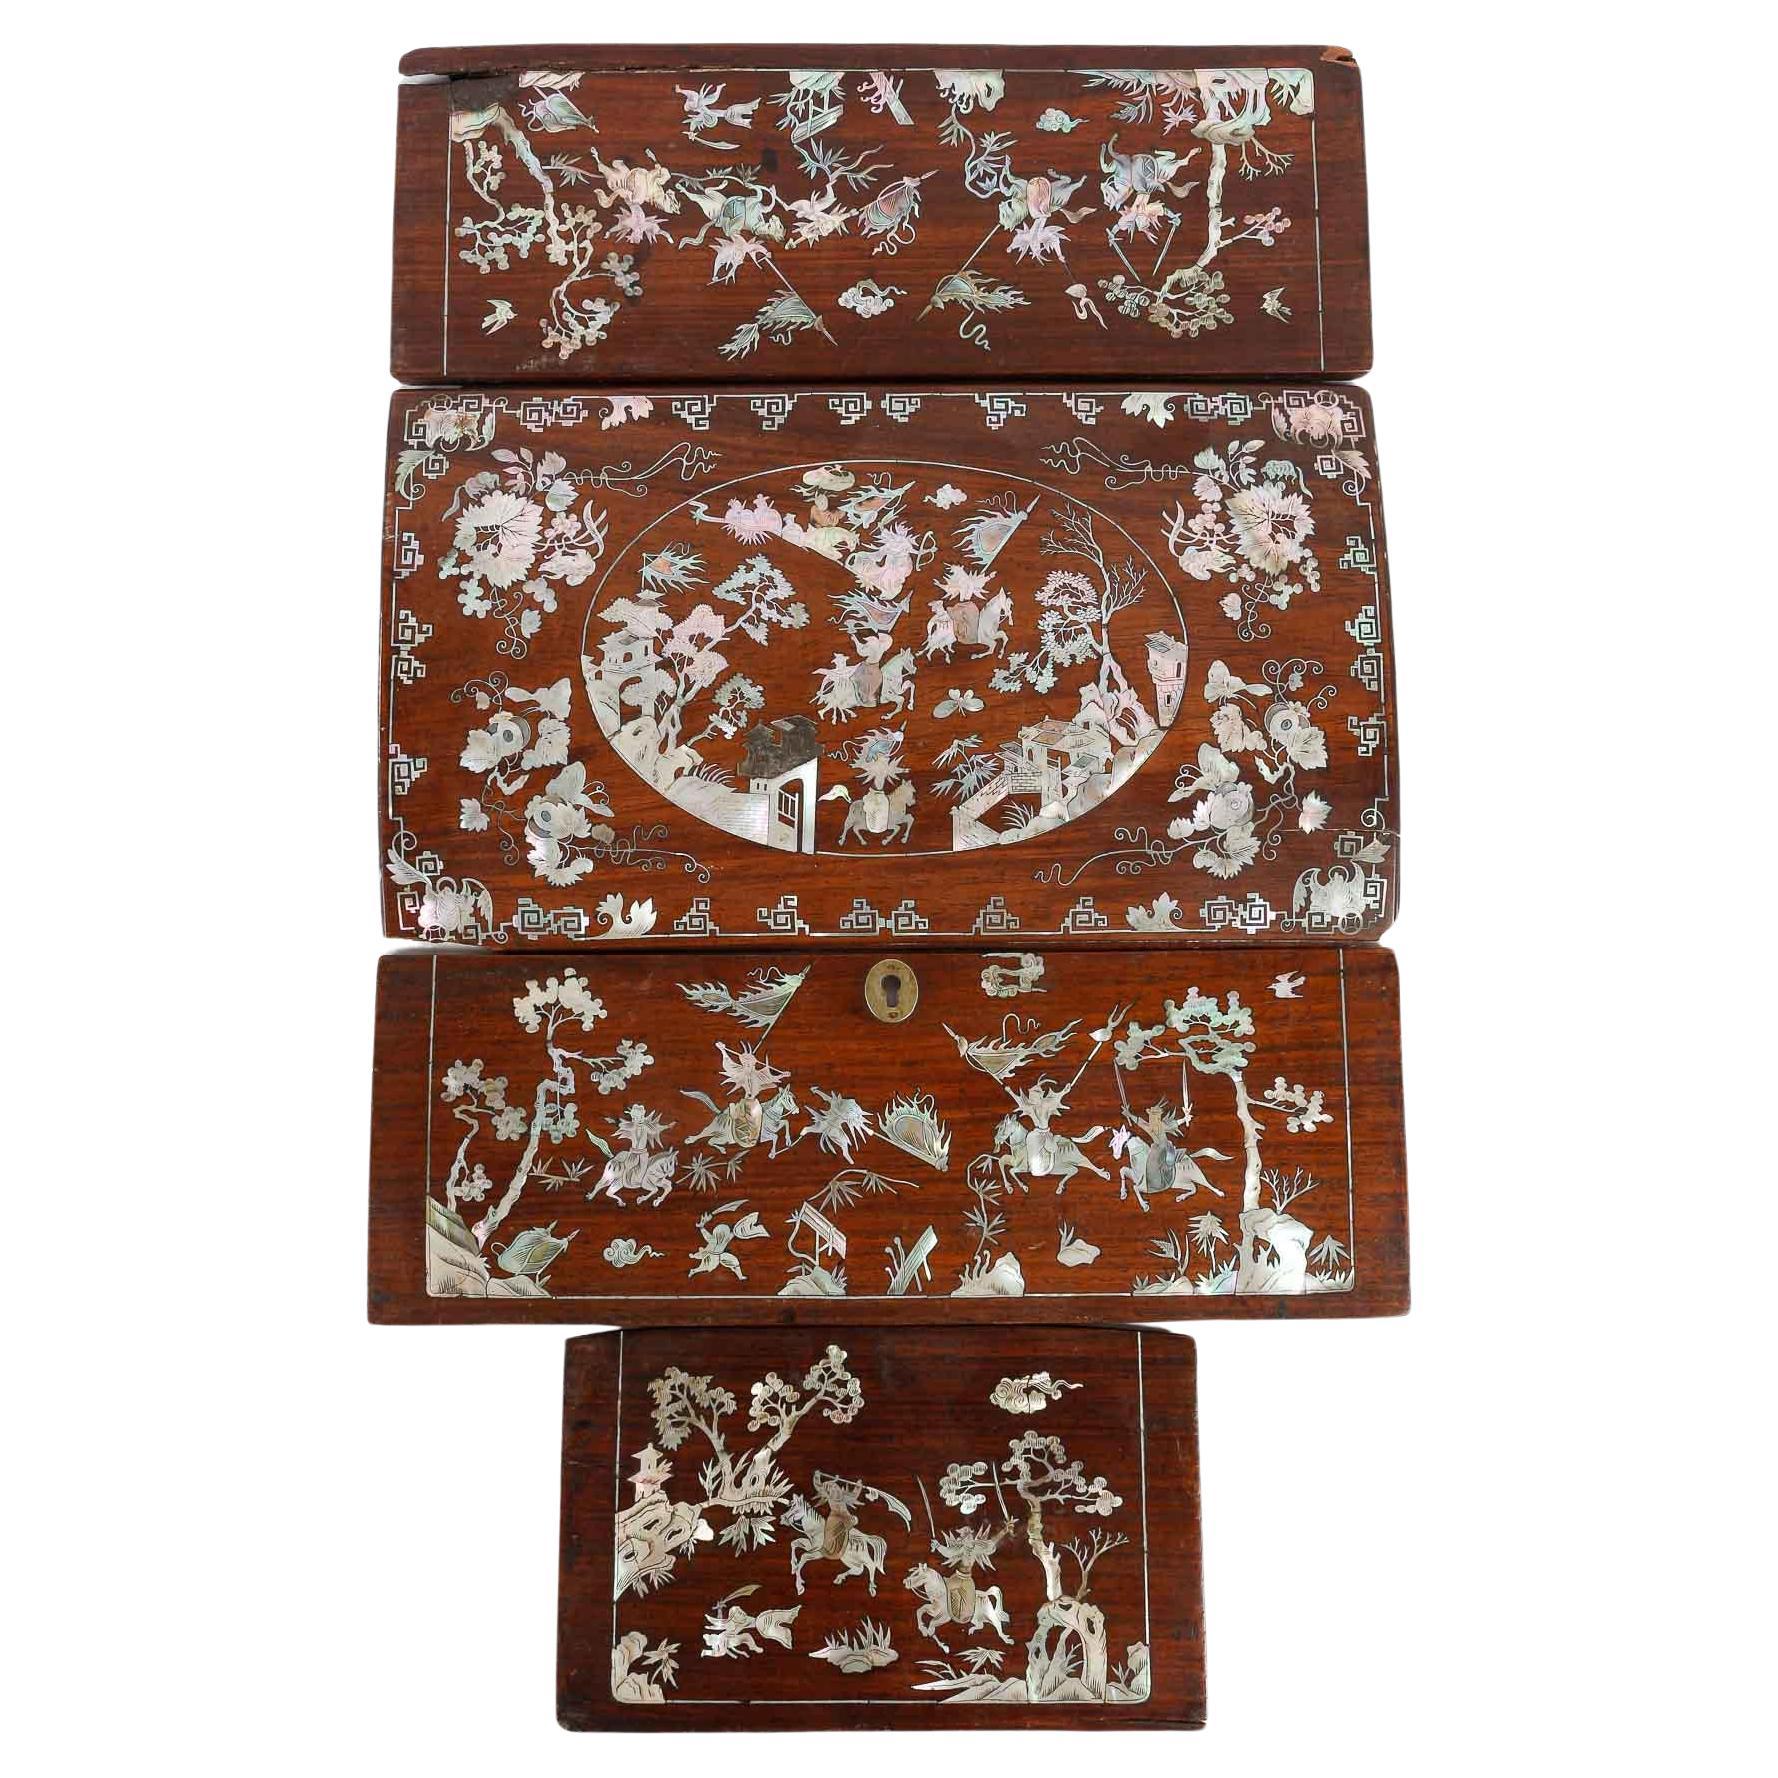 4 Panels of a Wooden Box with Mother of Pearl Inlay, Chinese Scenes. For Sale